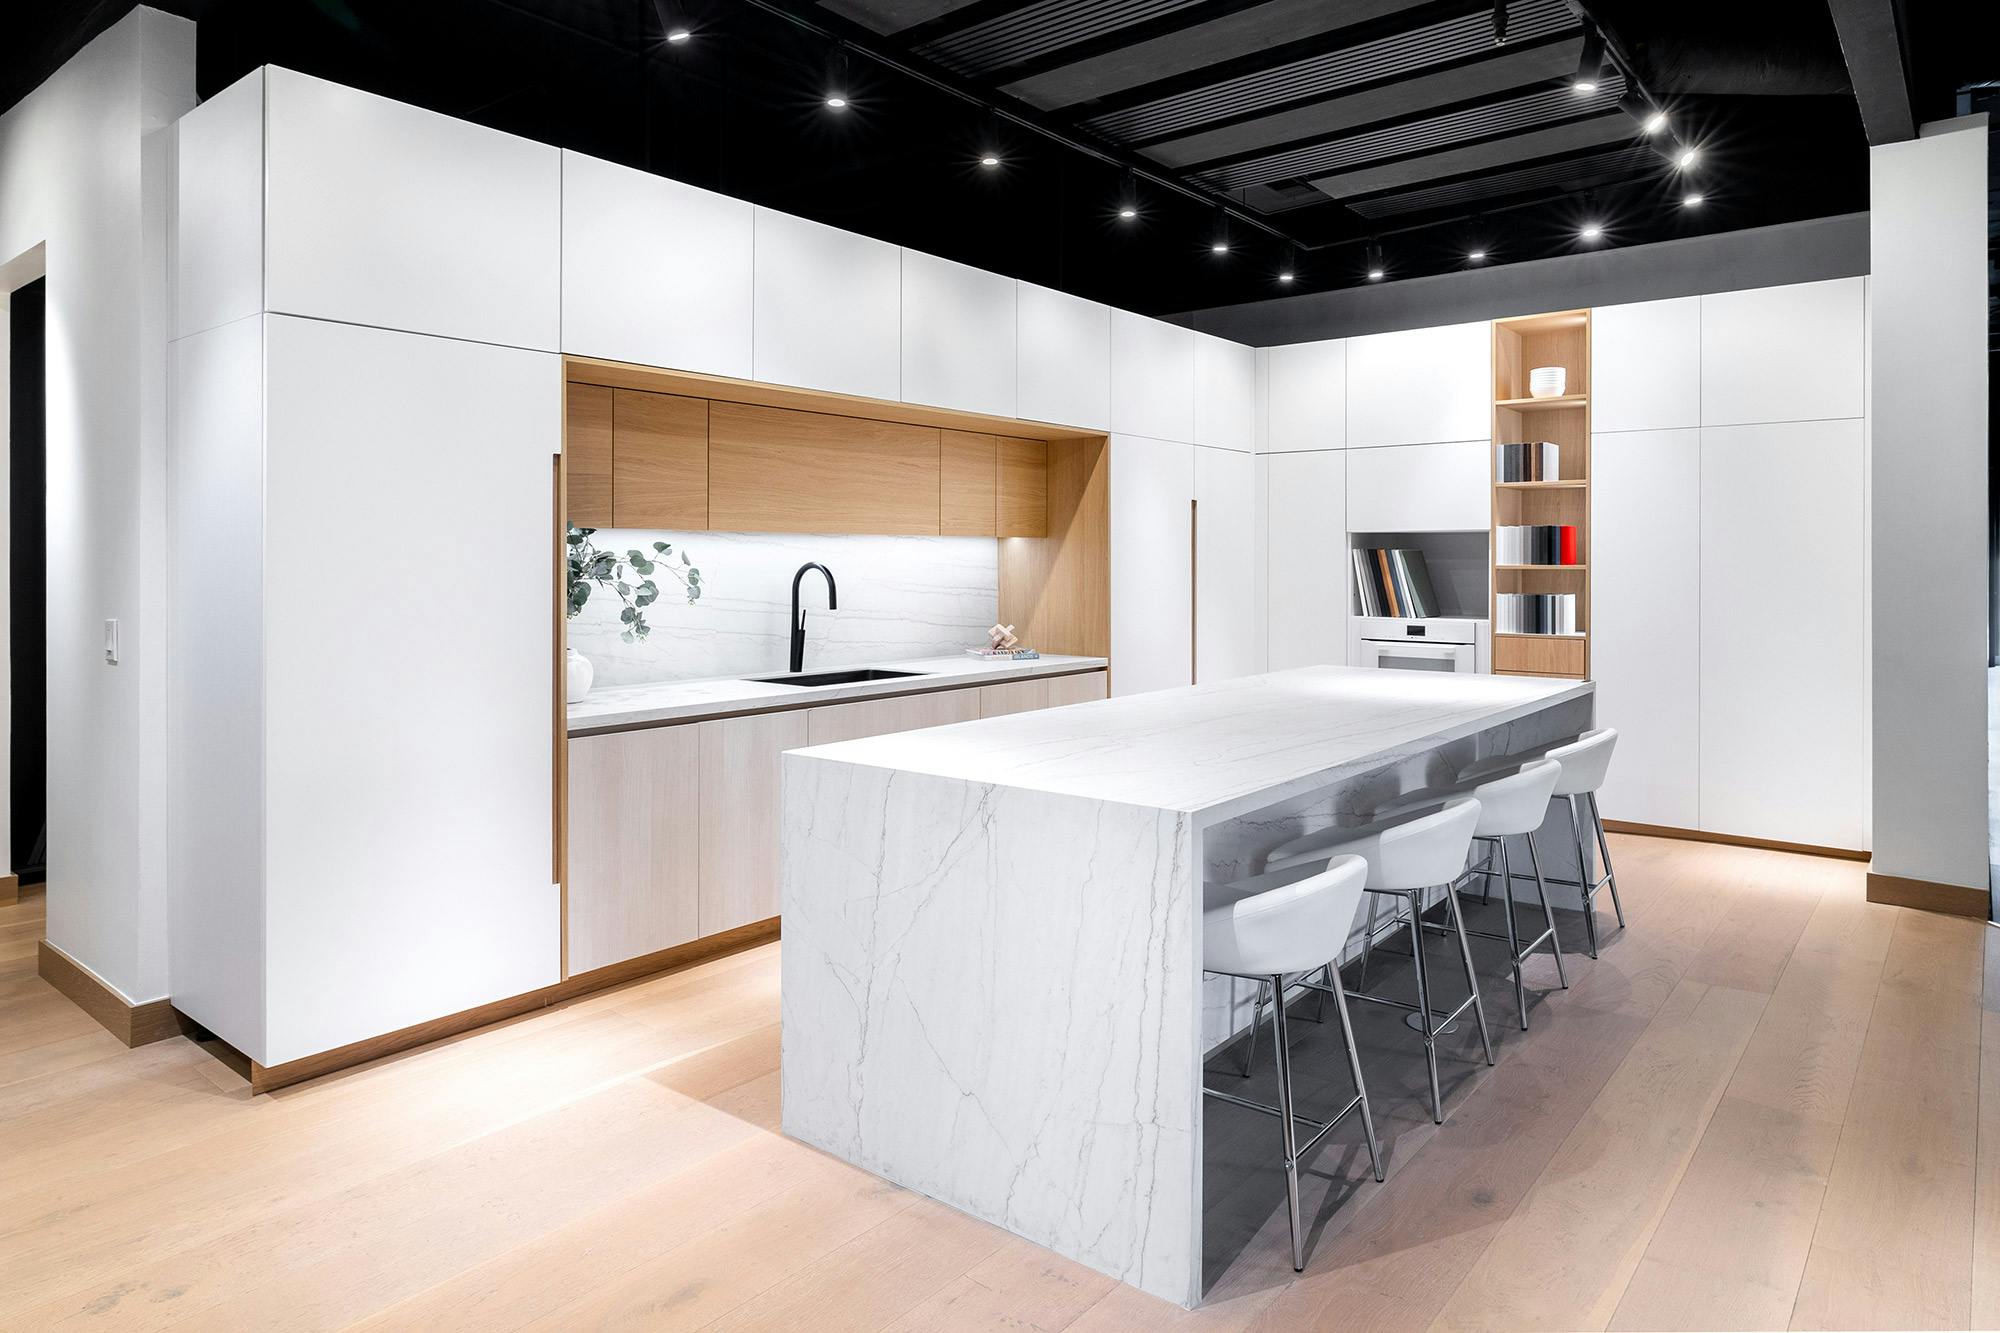 Image of RonbowshowroomSF brightroomSFMarcellPuzsar 3.jpg?auto=format%2Ccompress&ixlib=php 3.3 in Dekton Nilium unfolds its warm beauty throughout the range of organic materials of this calm and sensory home - Cosentino